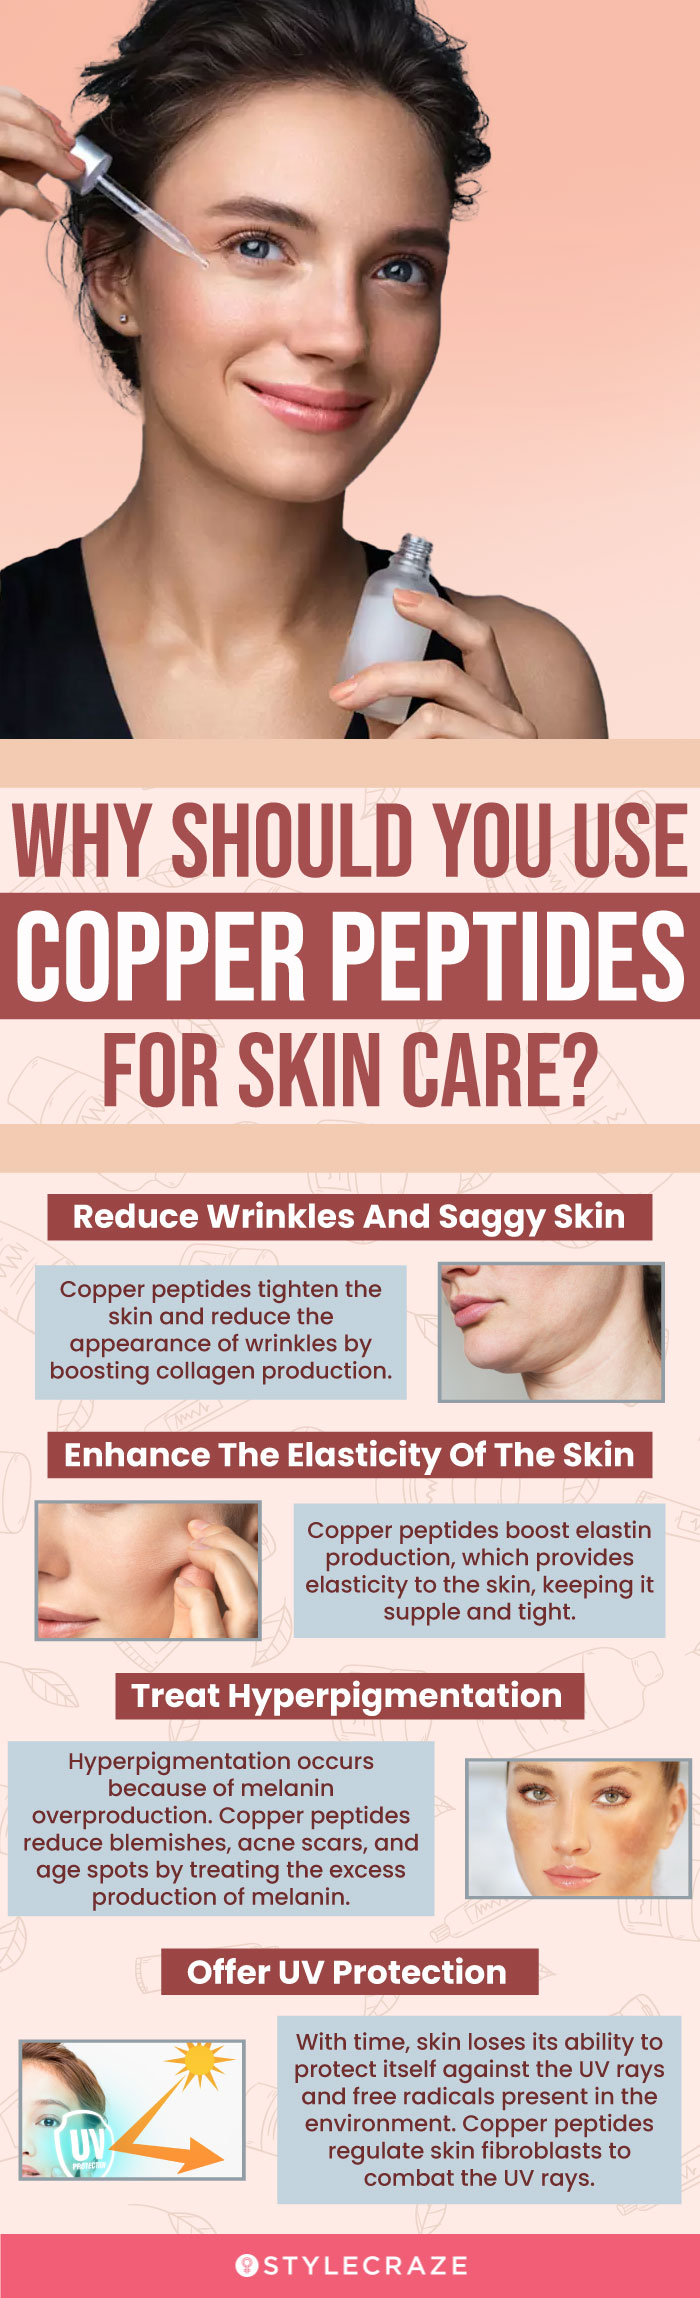 why should you use copper peptides for skin care (infographic)